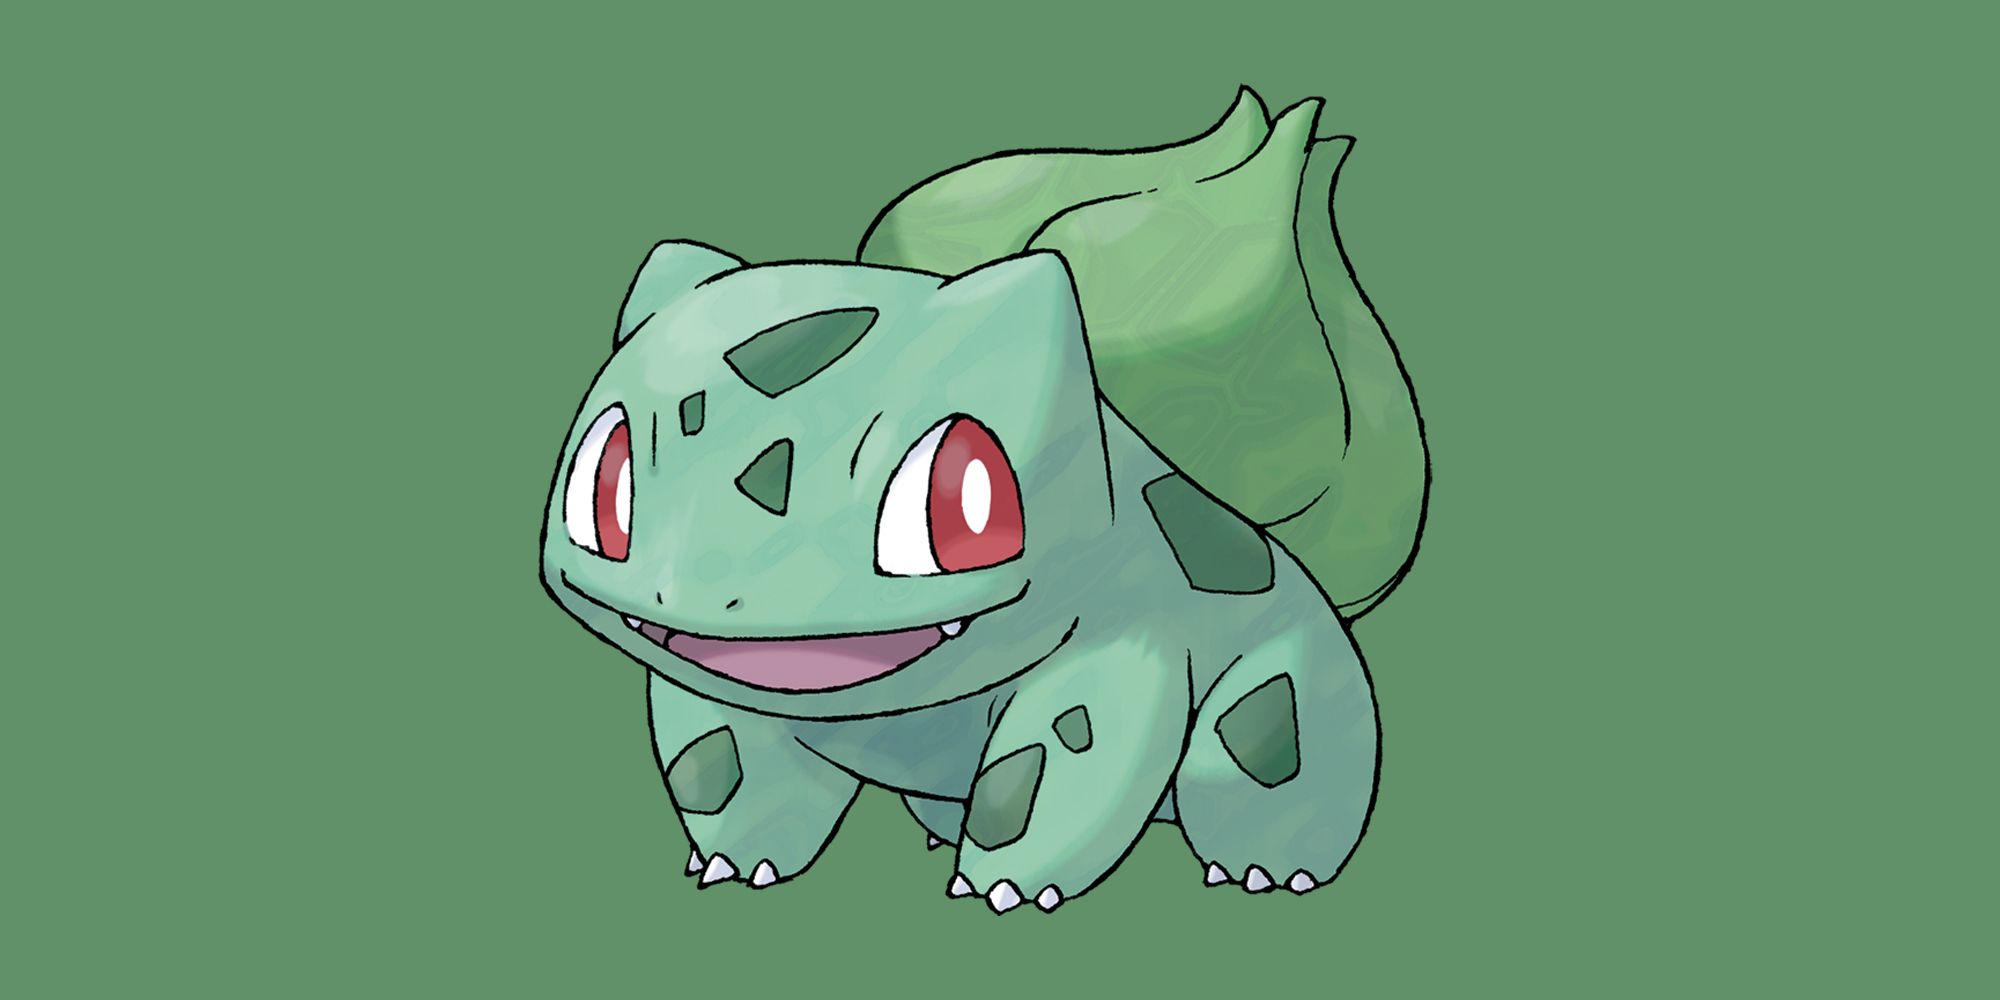 Pokémon Bulbasaur smiling and standing in front of a moss-green background